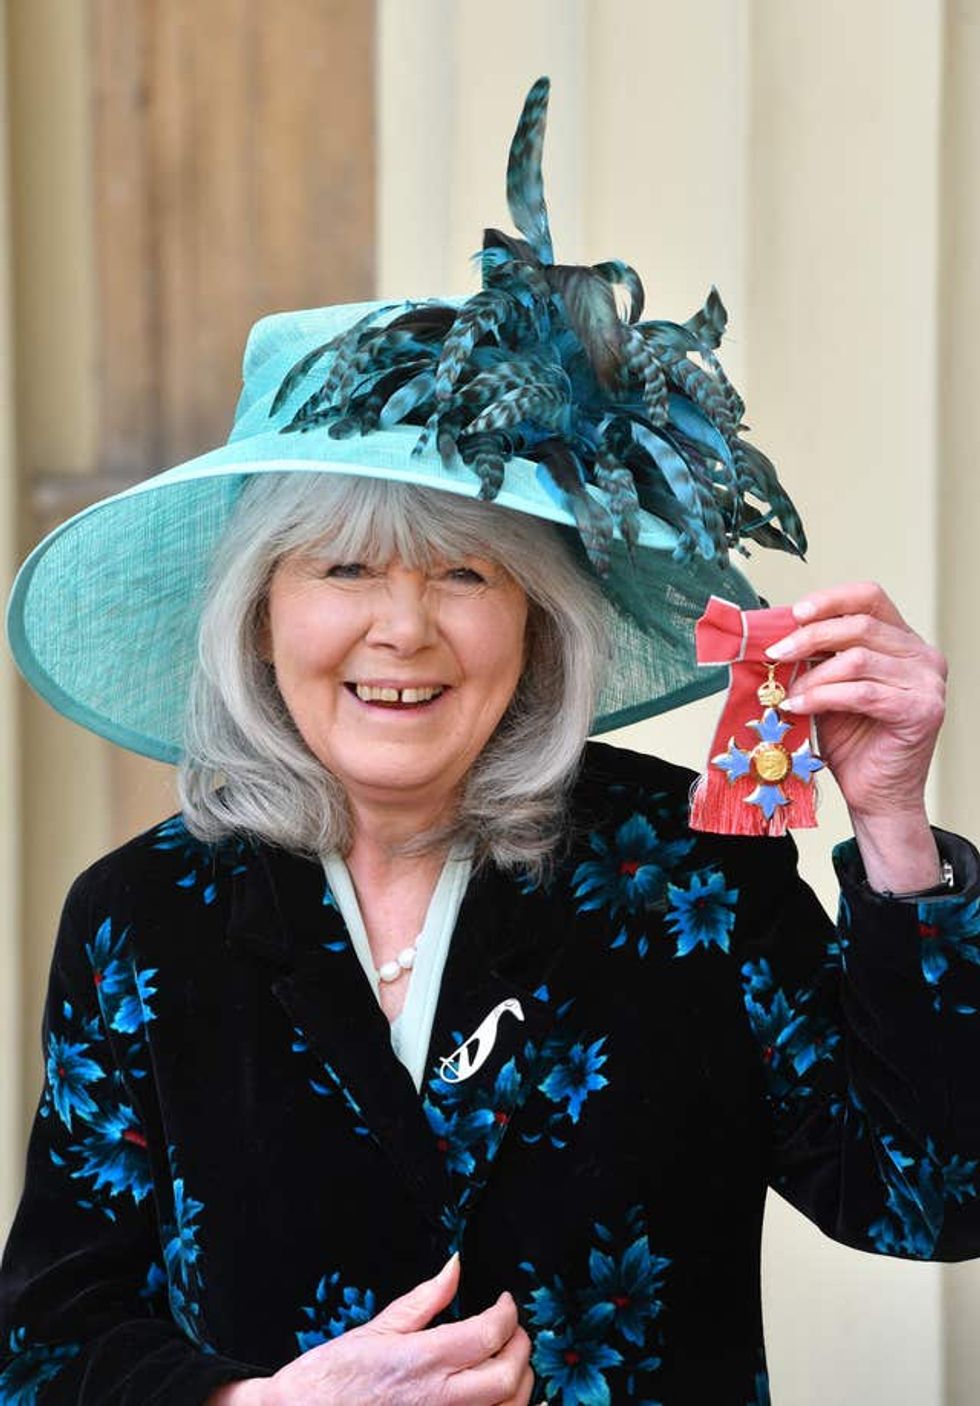 Author Jilly Cooper